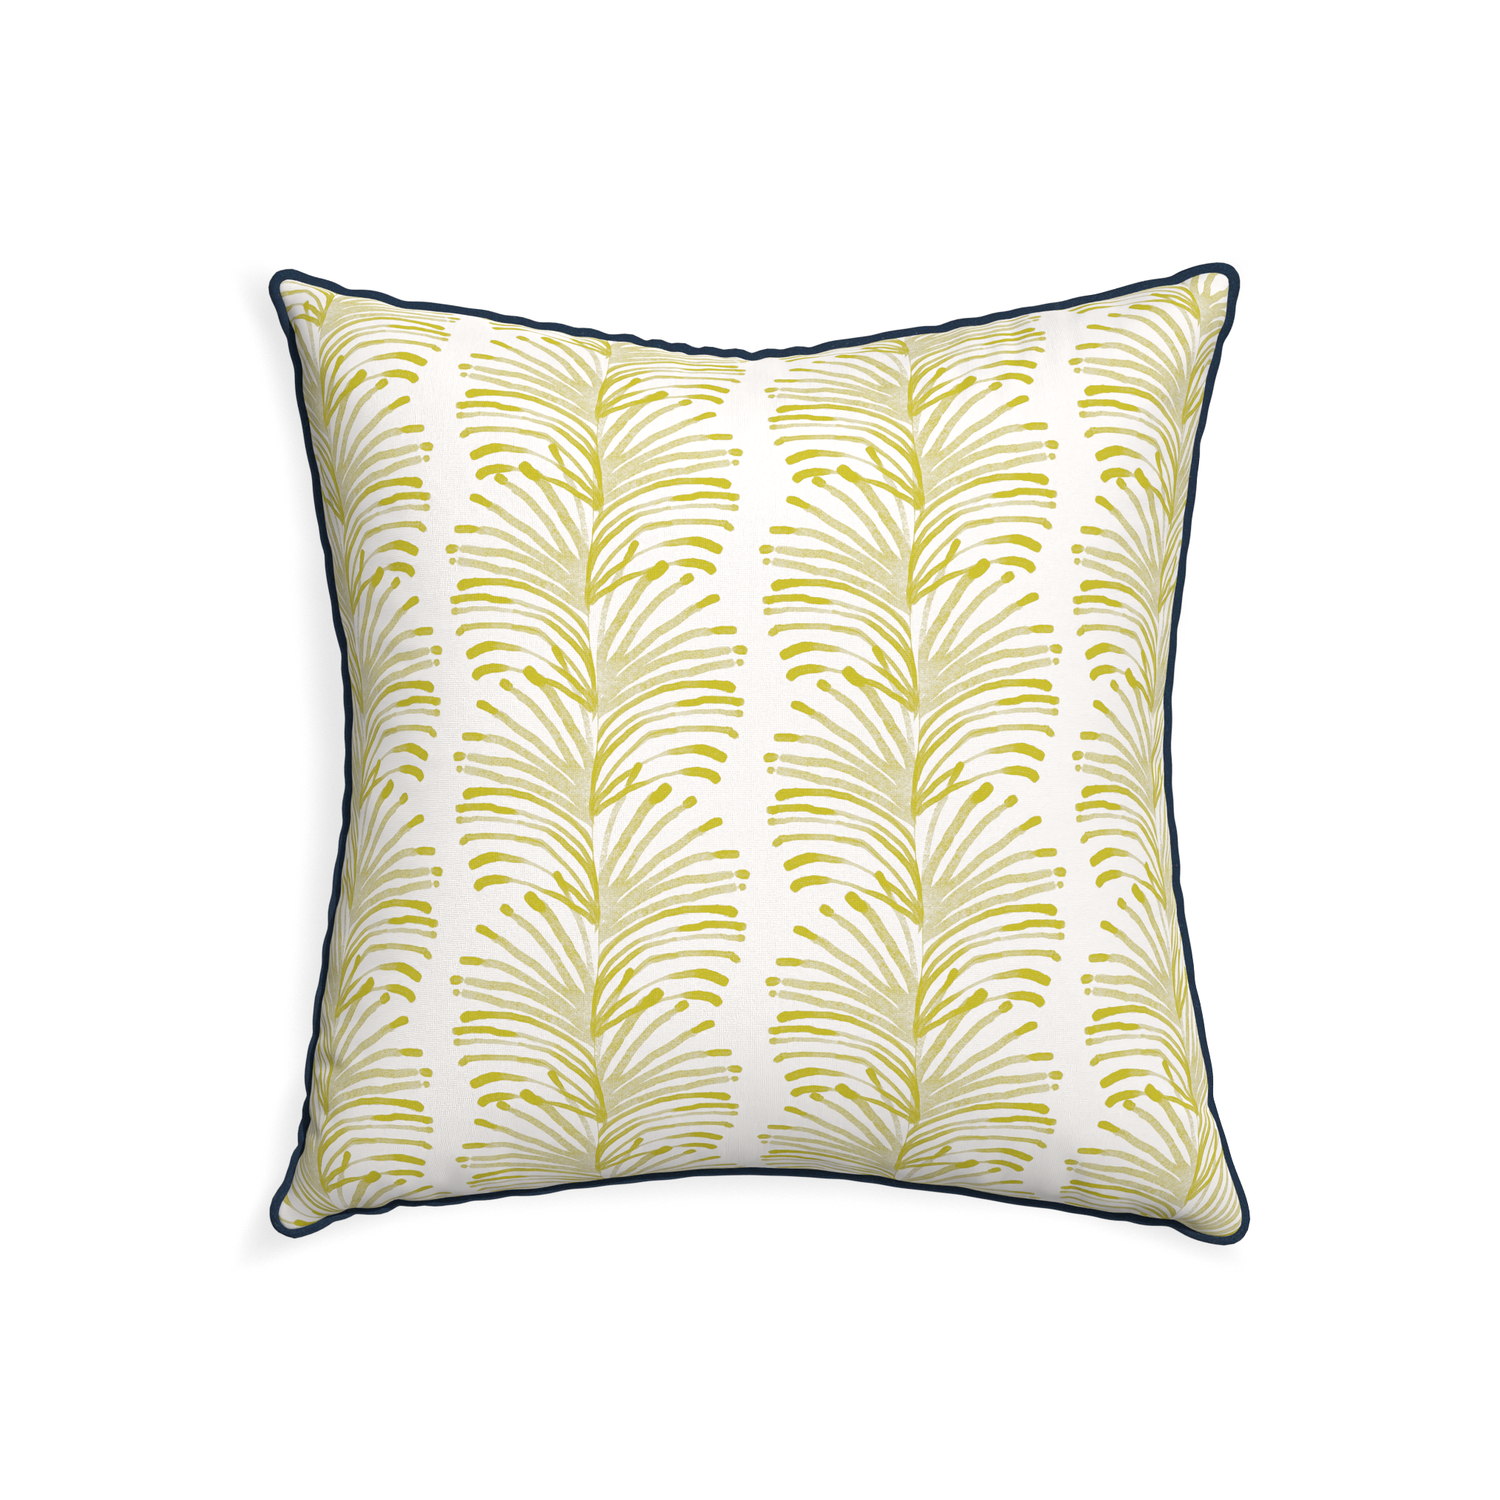 22-square emma chartreuse custom yellow stripe chartreusepillow with c piping on white background